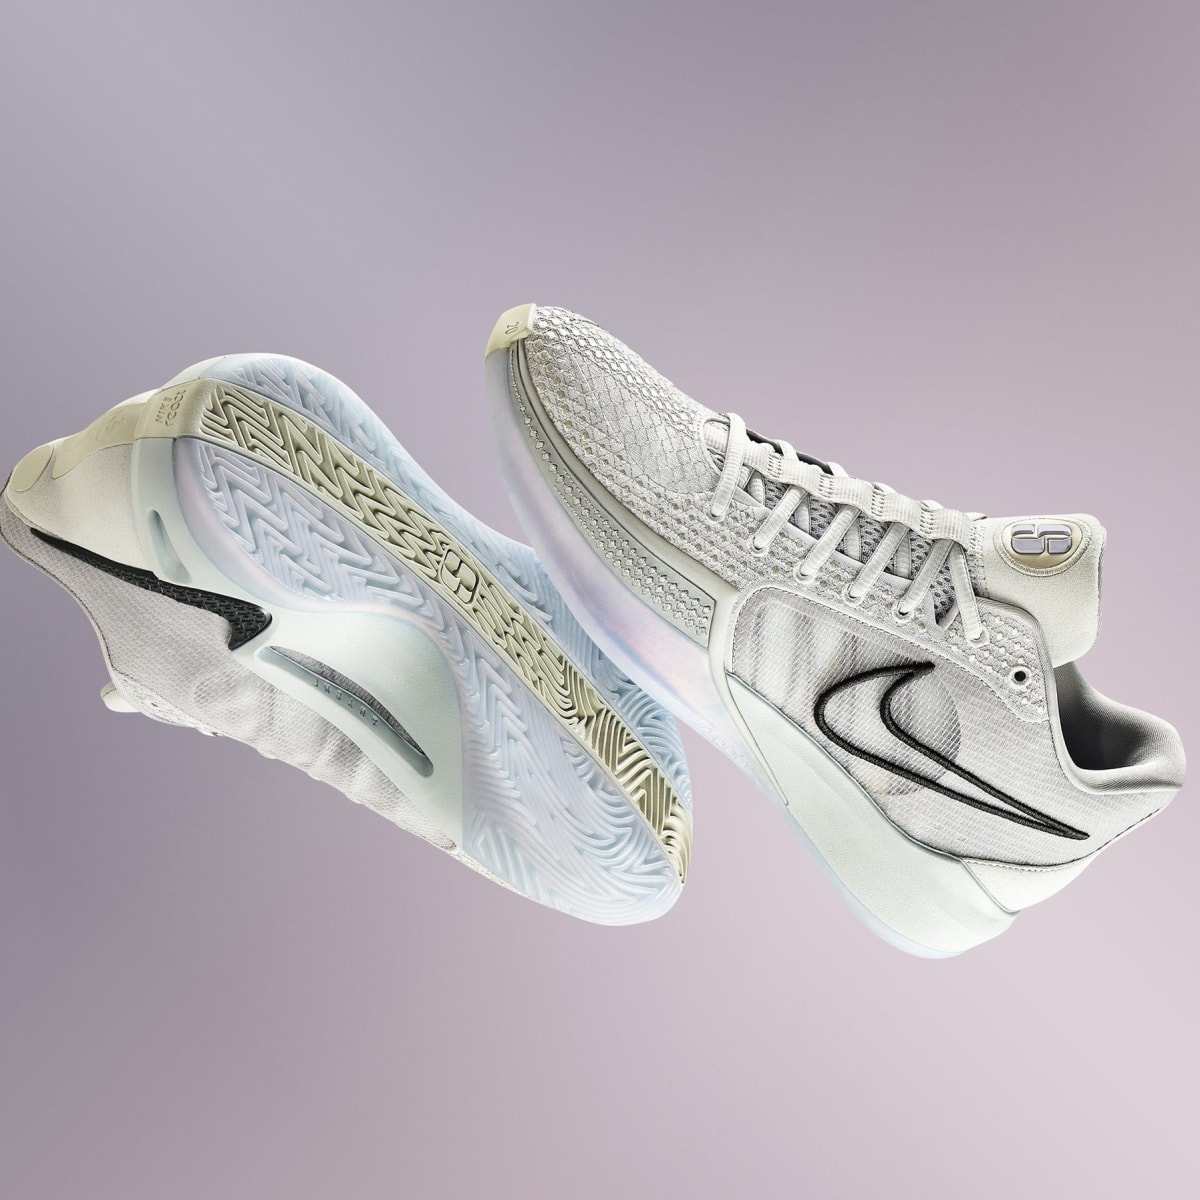 Sabrina Ionescu: Sabrina Ionescu x Nike Sabrina 1 Spark shoes: Where to  get, release date, price, and more details explored